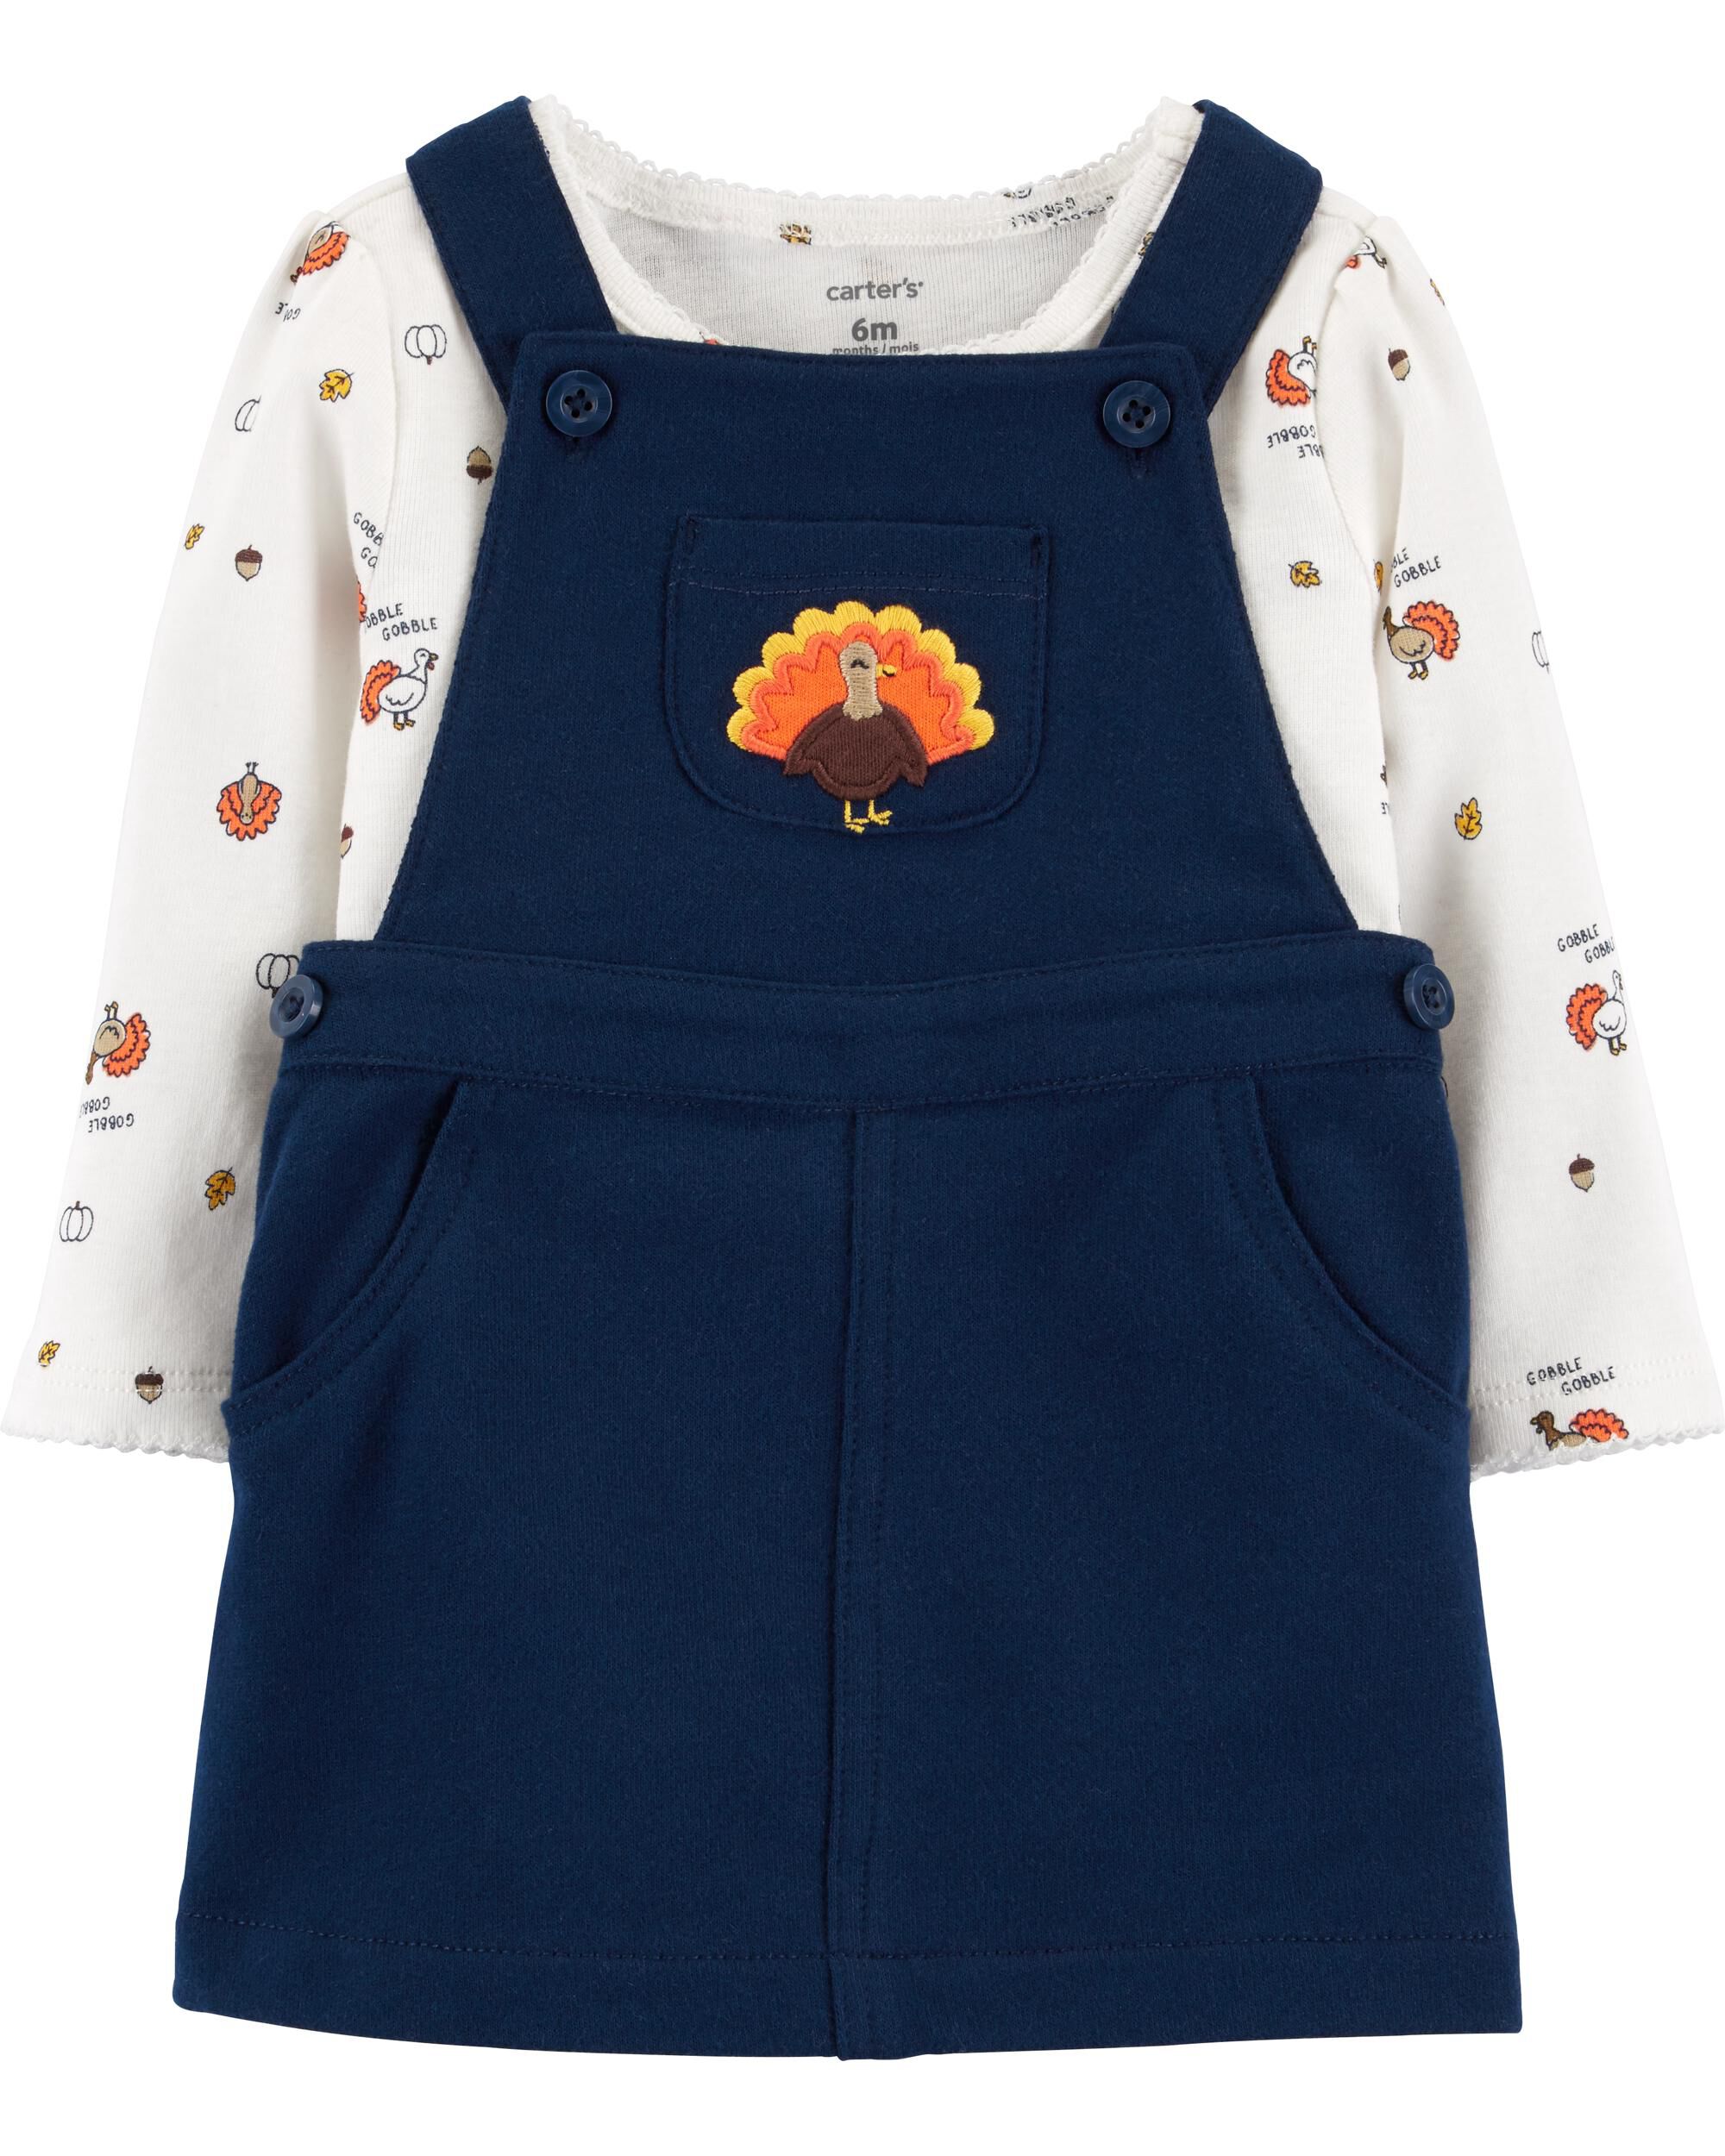 Holiday Shop: Baby | Carter's | Free 